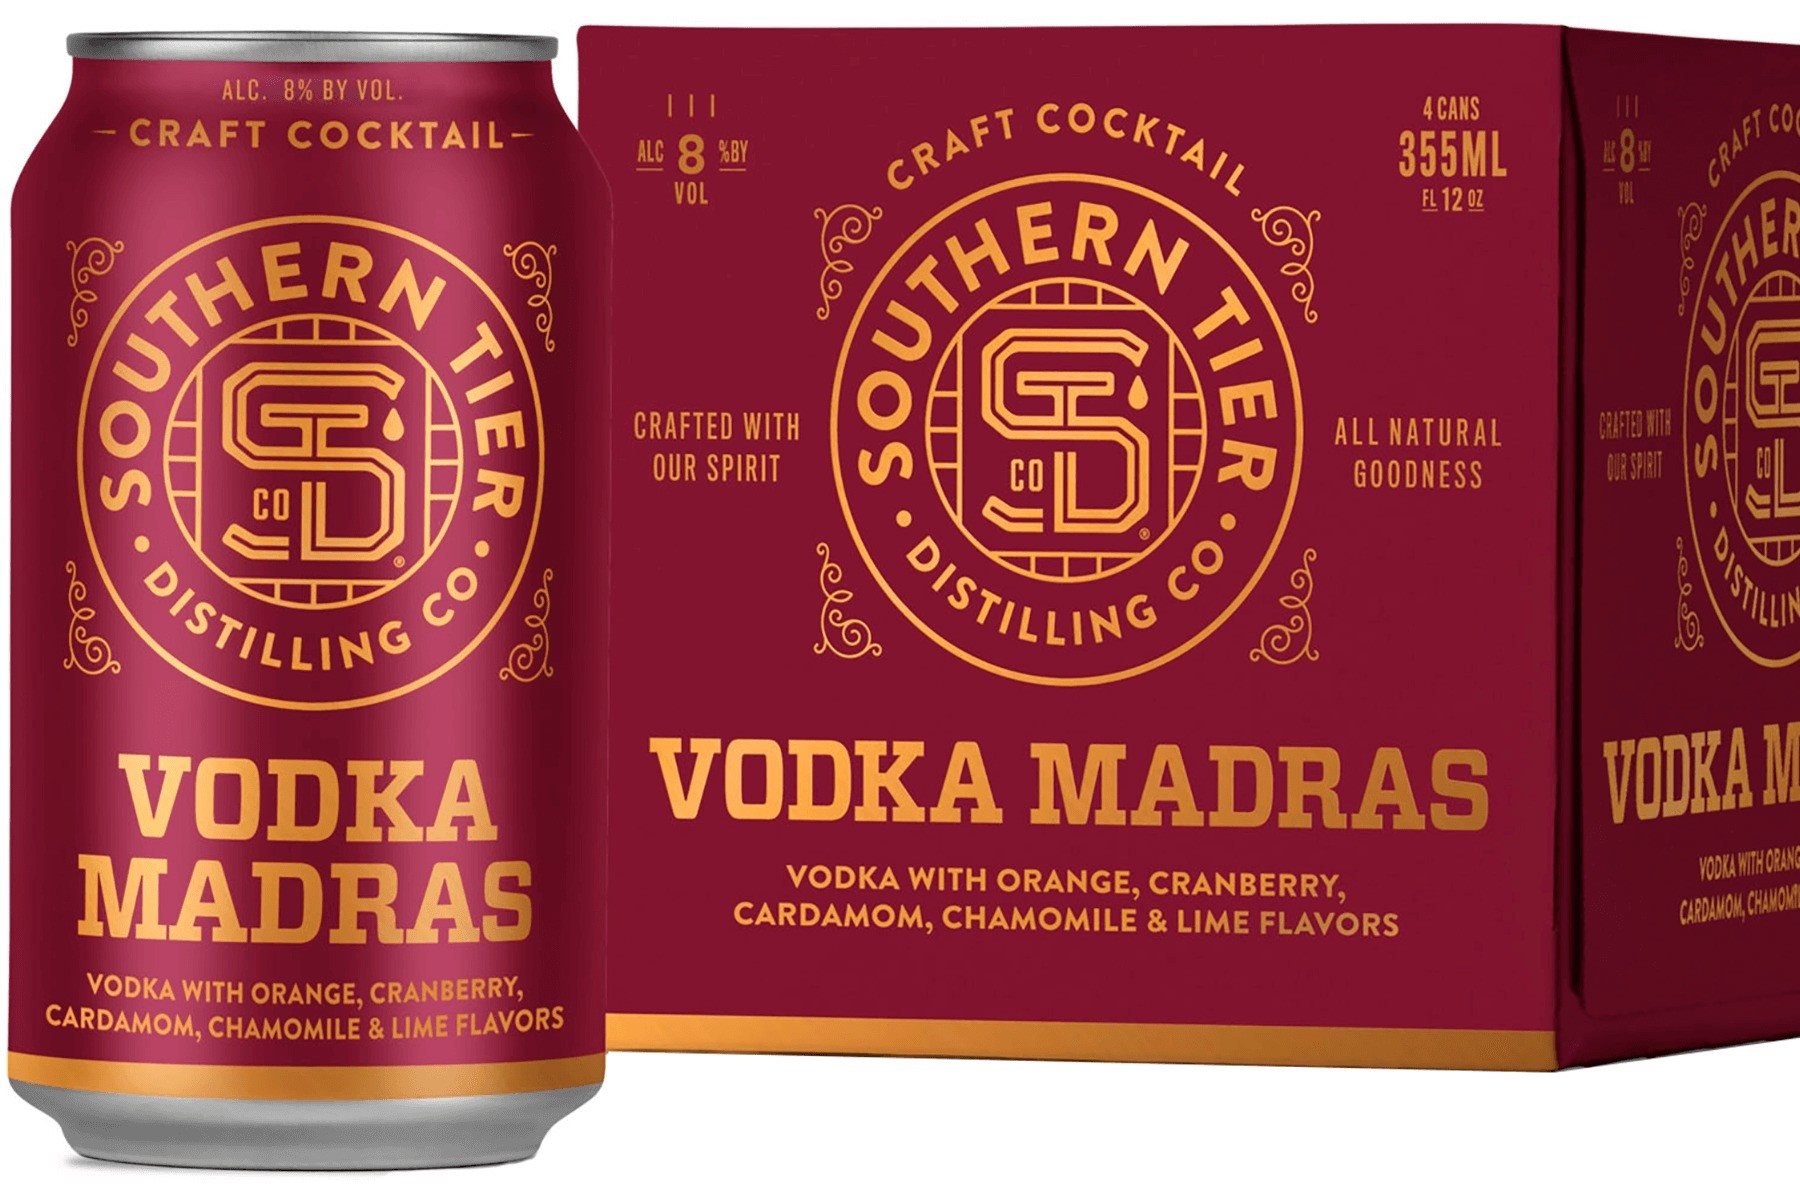 15-southern-tier-vodka-madras-nutrition-facts